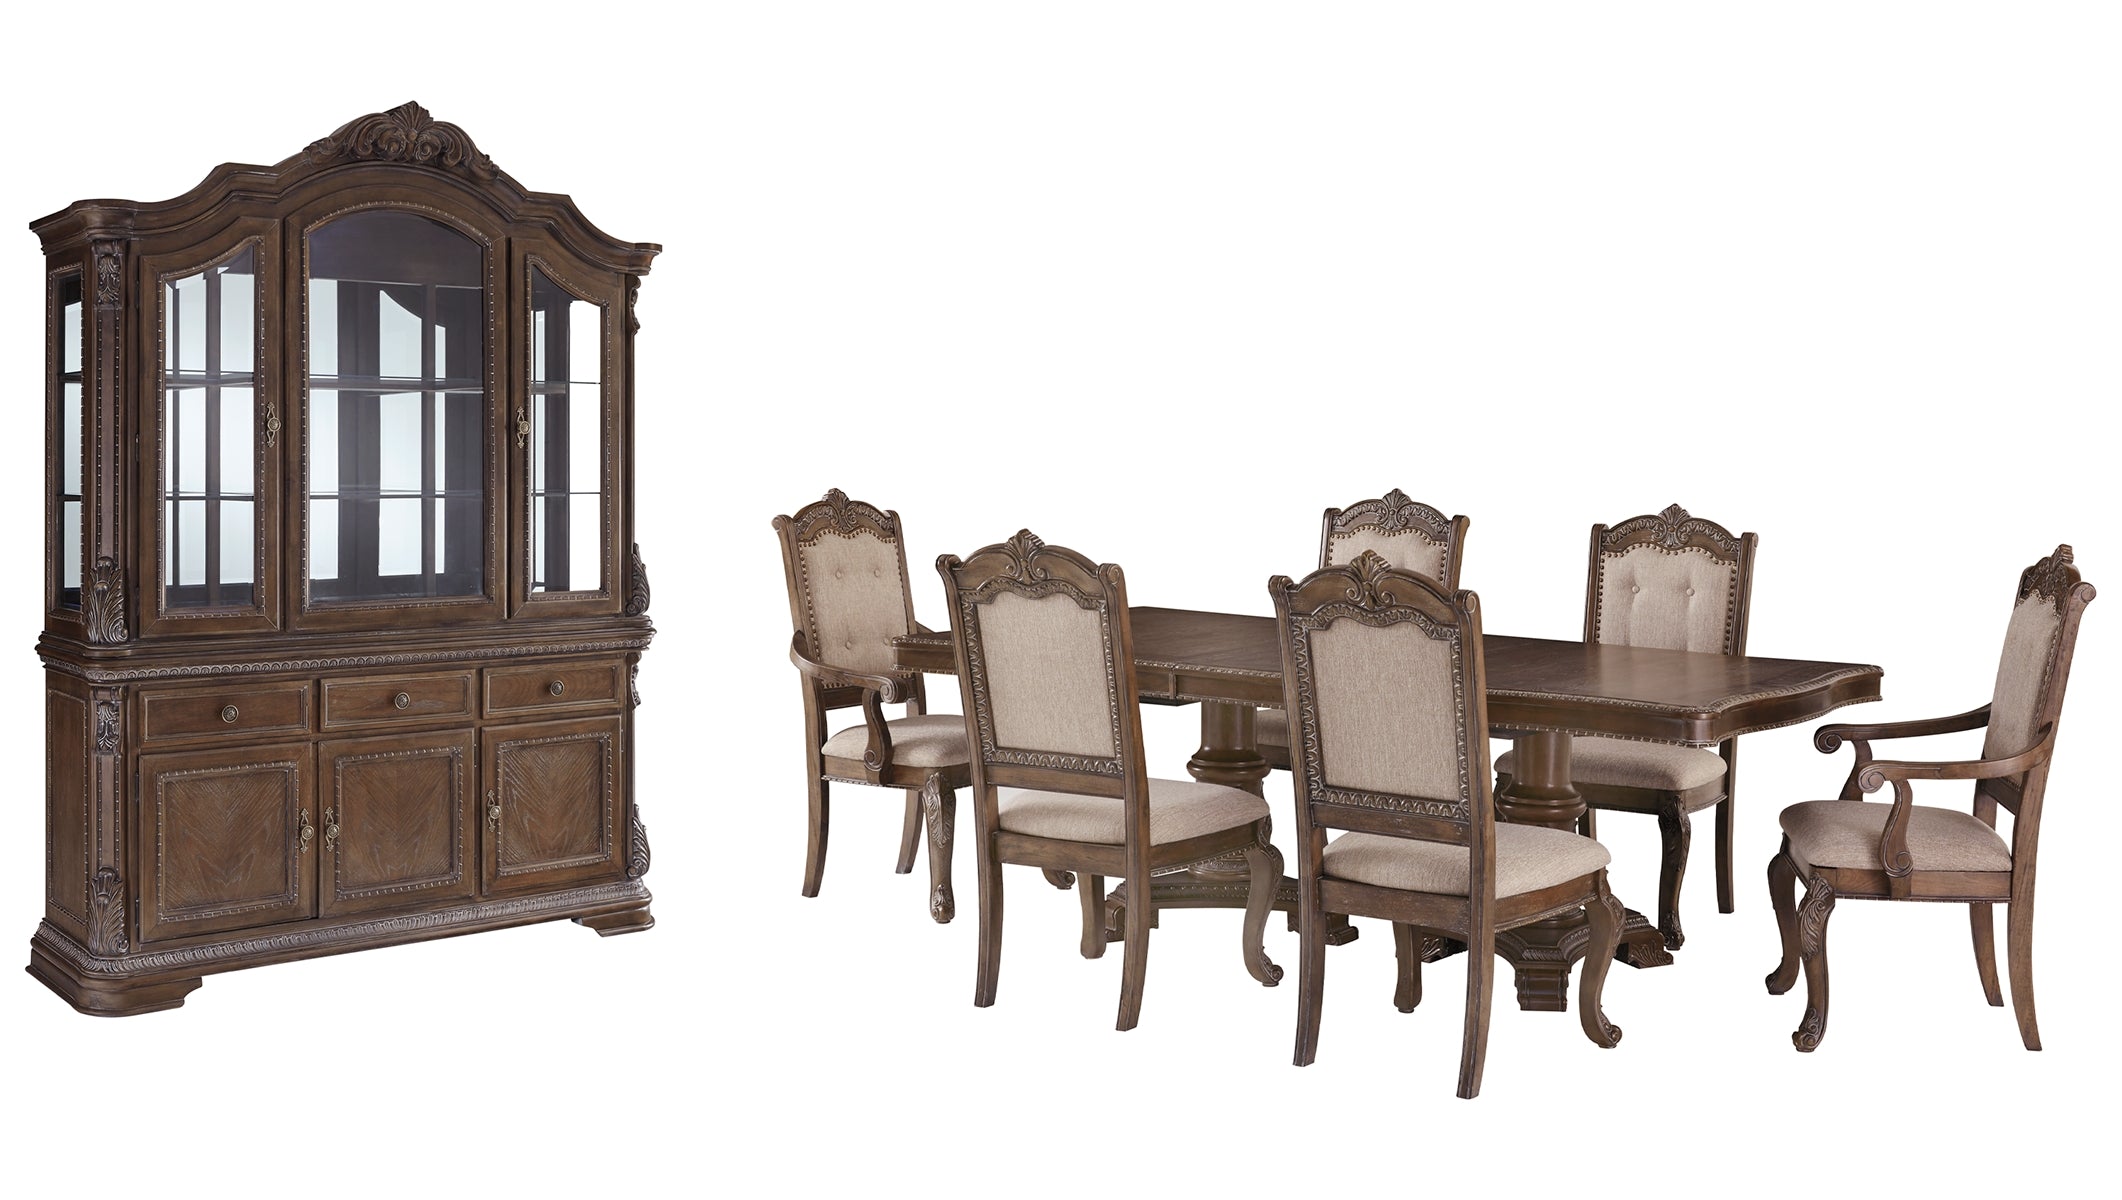 Charmond Dining Table and 6 Chairs with Storage